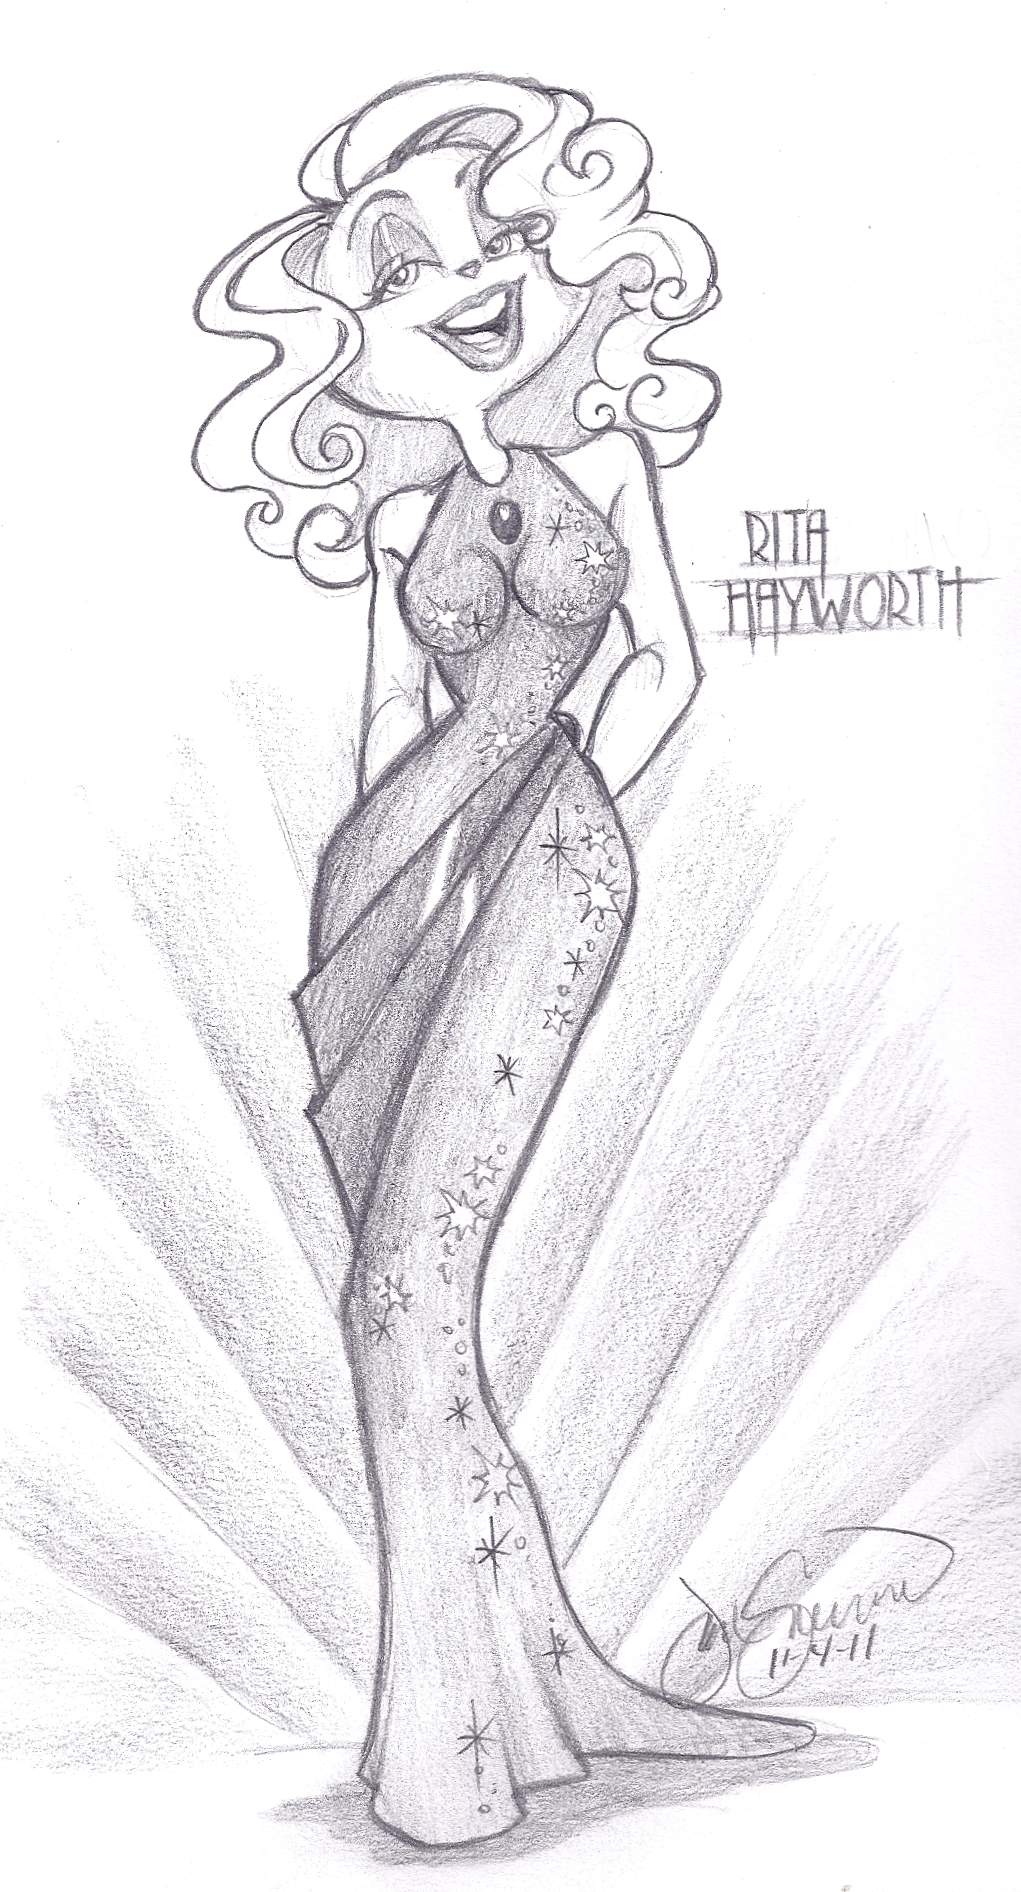 Cartoon Rita Hayworth-“Put the blame on Mame” Sketch of the Day-Part 2